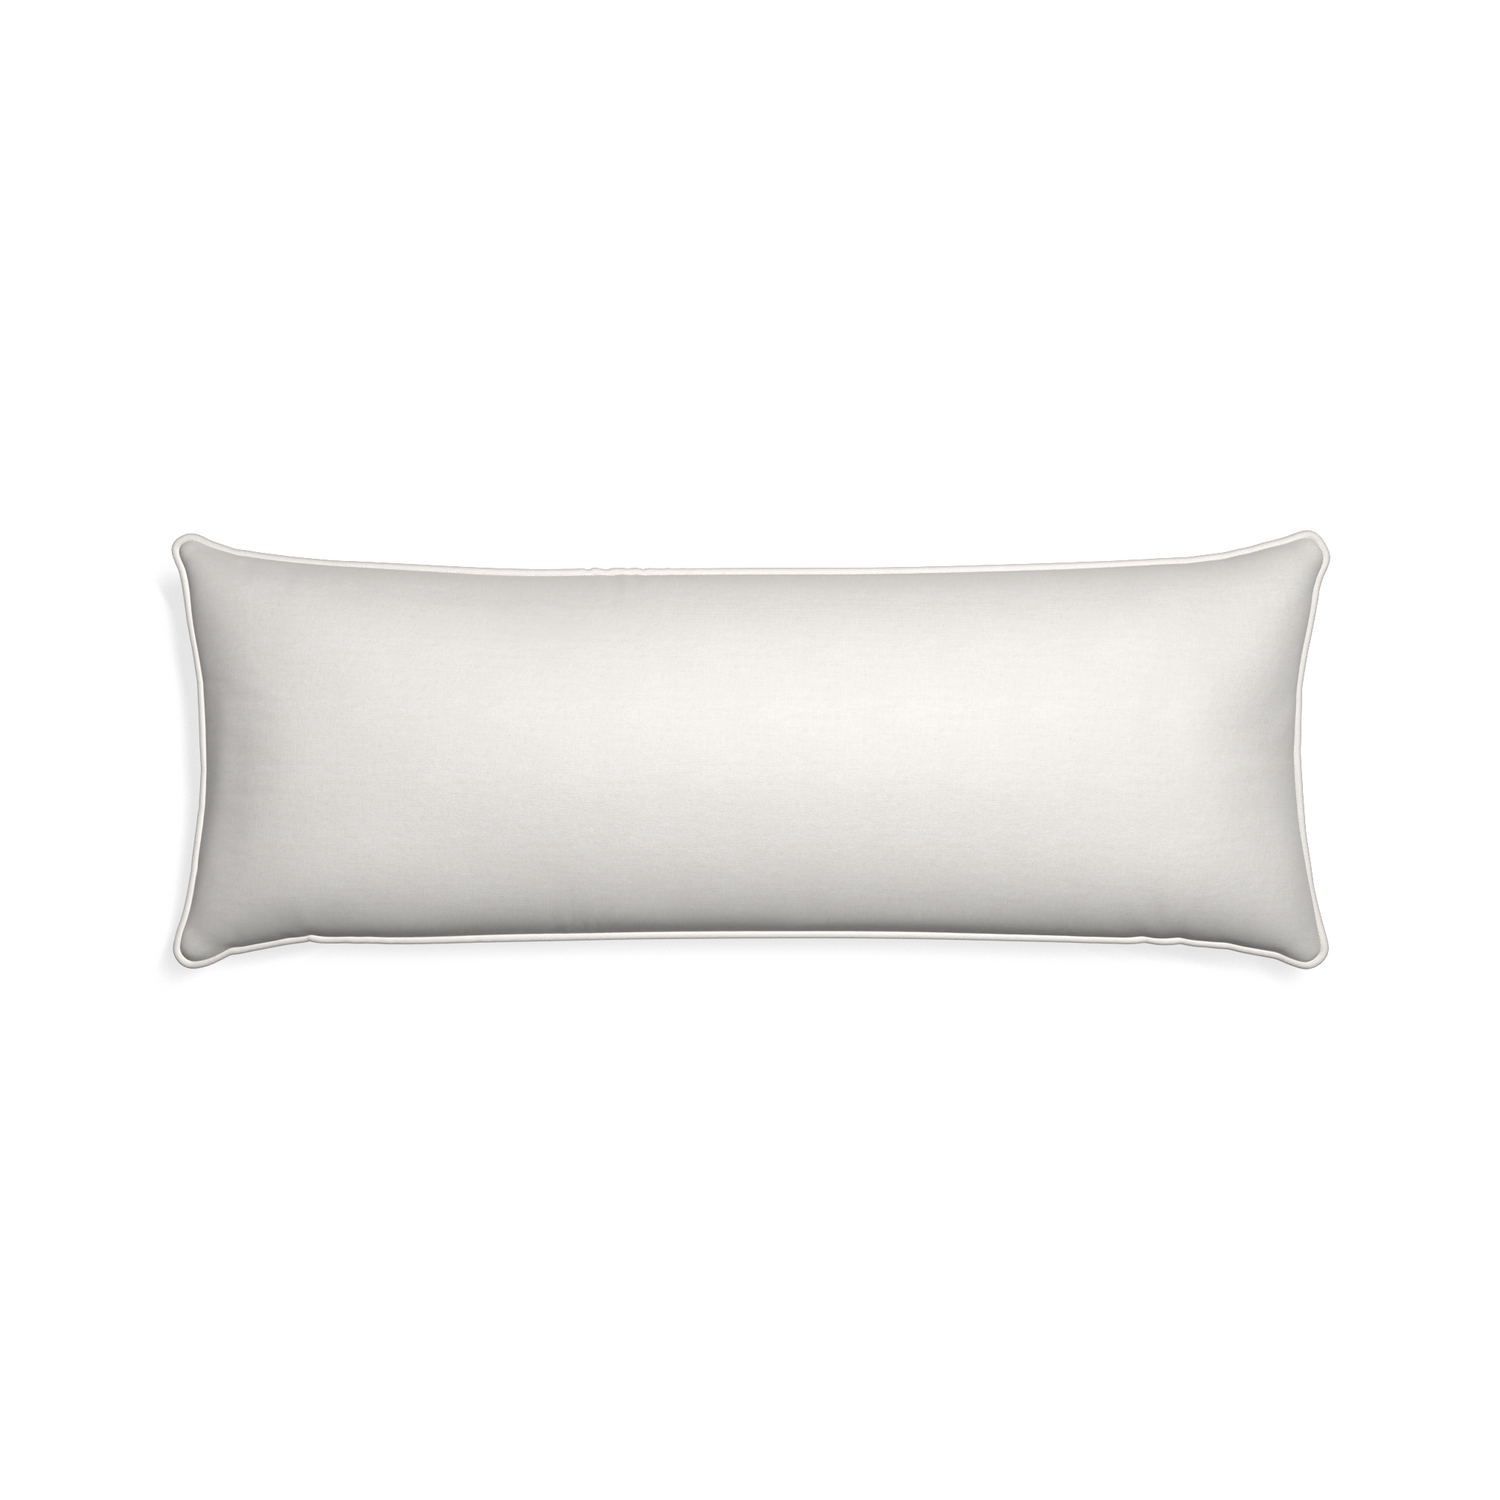 Xl-lumbar flour custom pillow with snow piping on white background